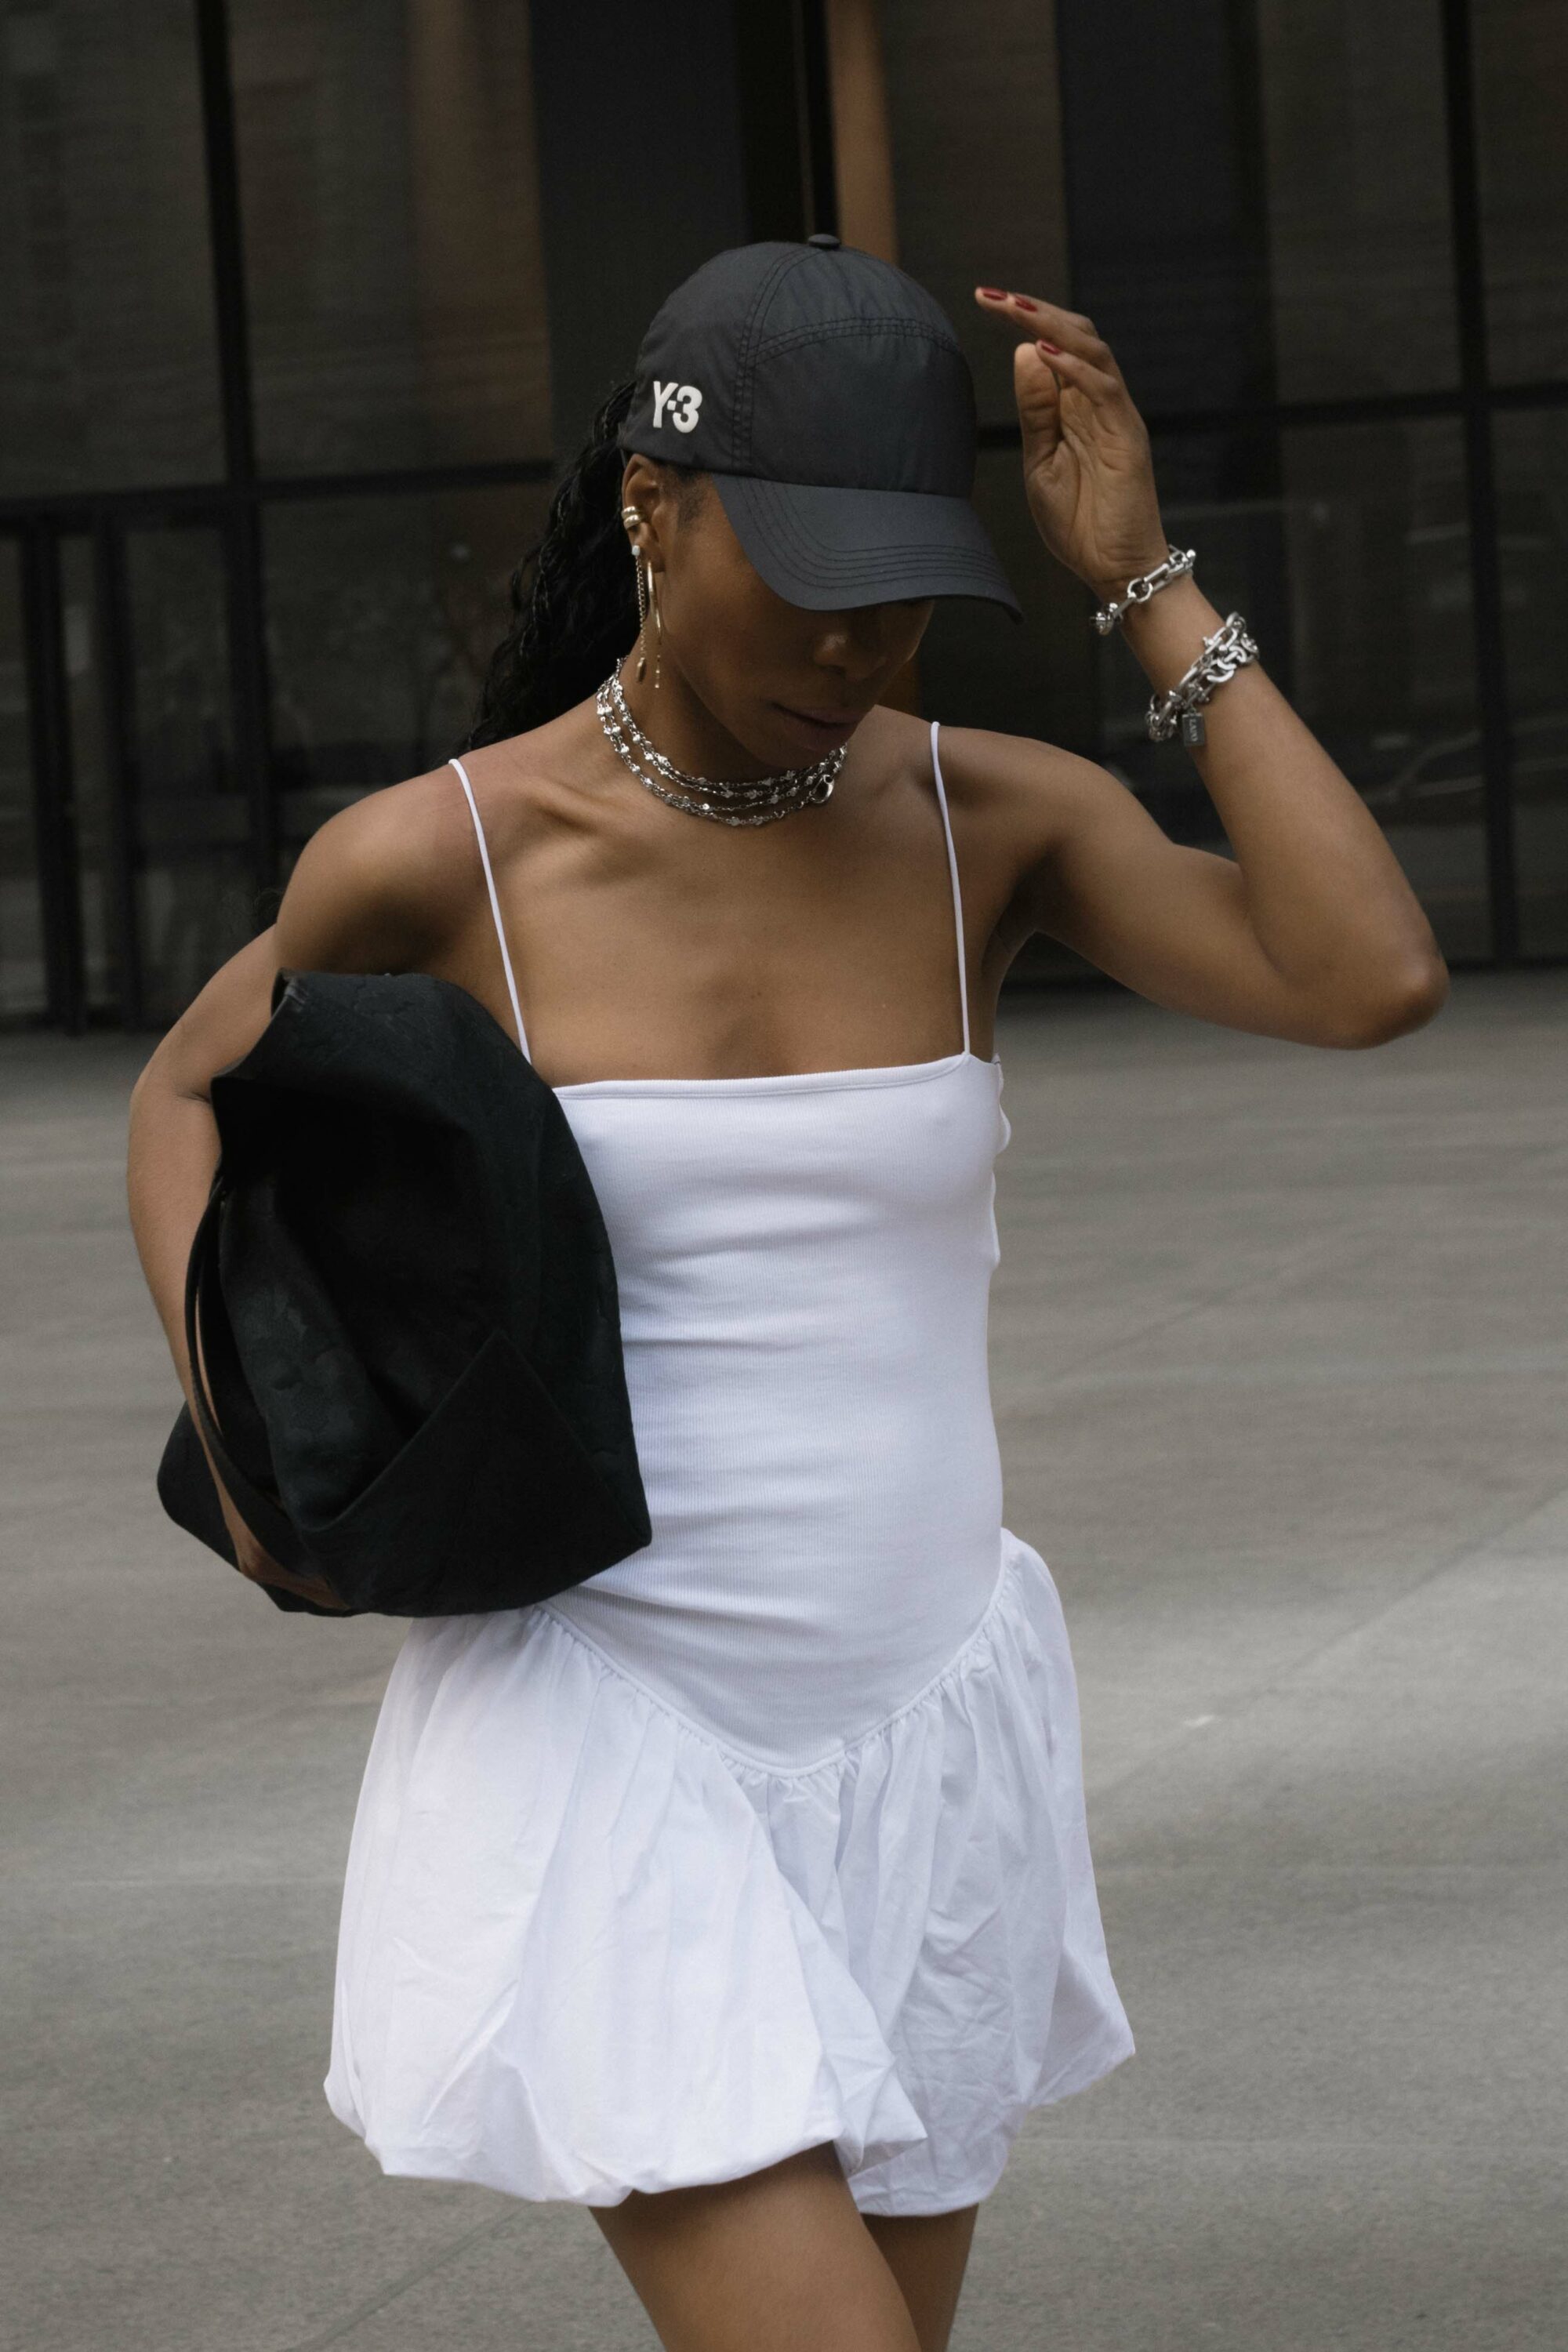 A woman in a white tennis dress, black sneakers, an oversized black tote bag, baseball cap, and silver jewelry smiles as she walks down the street.